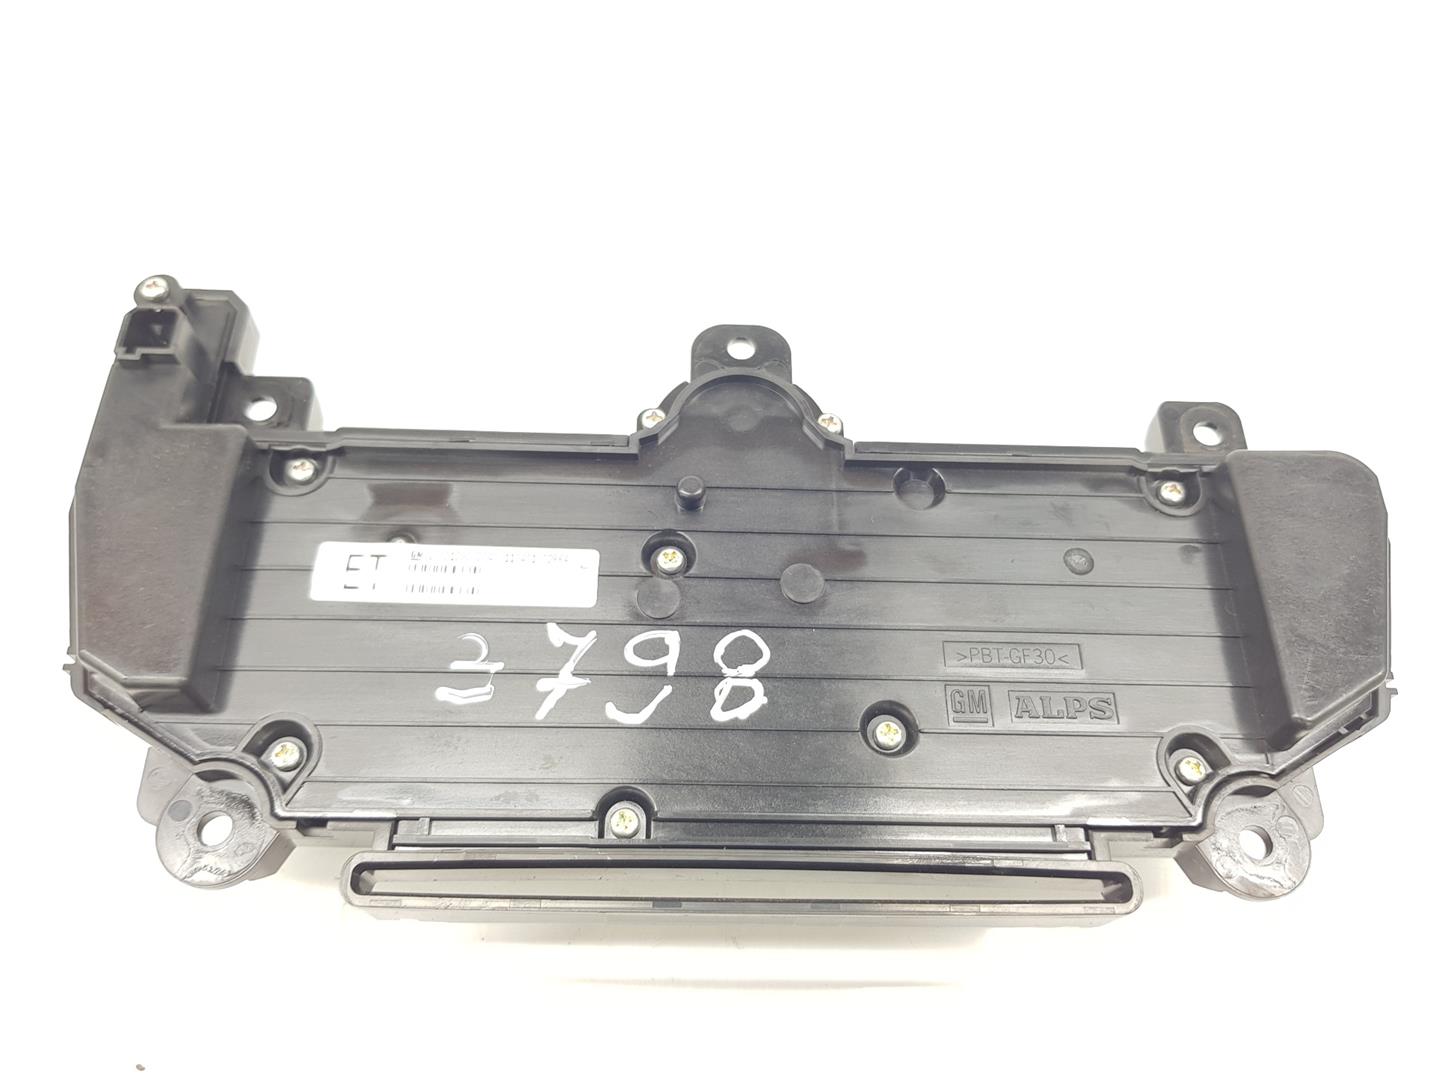 OPEL Insignia A (2008-2016) Switches 13321292, 13321292 21075644